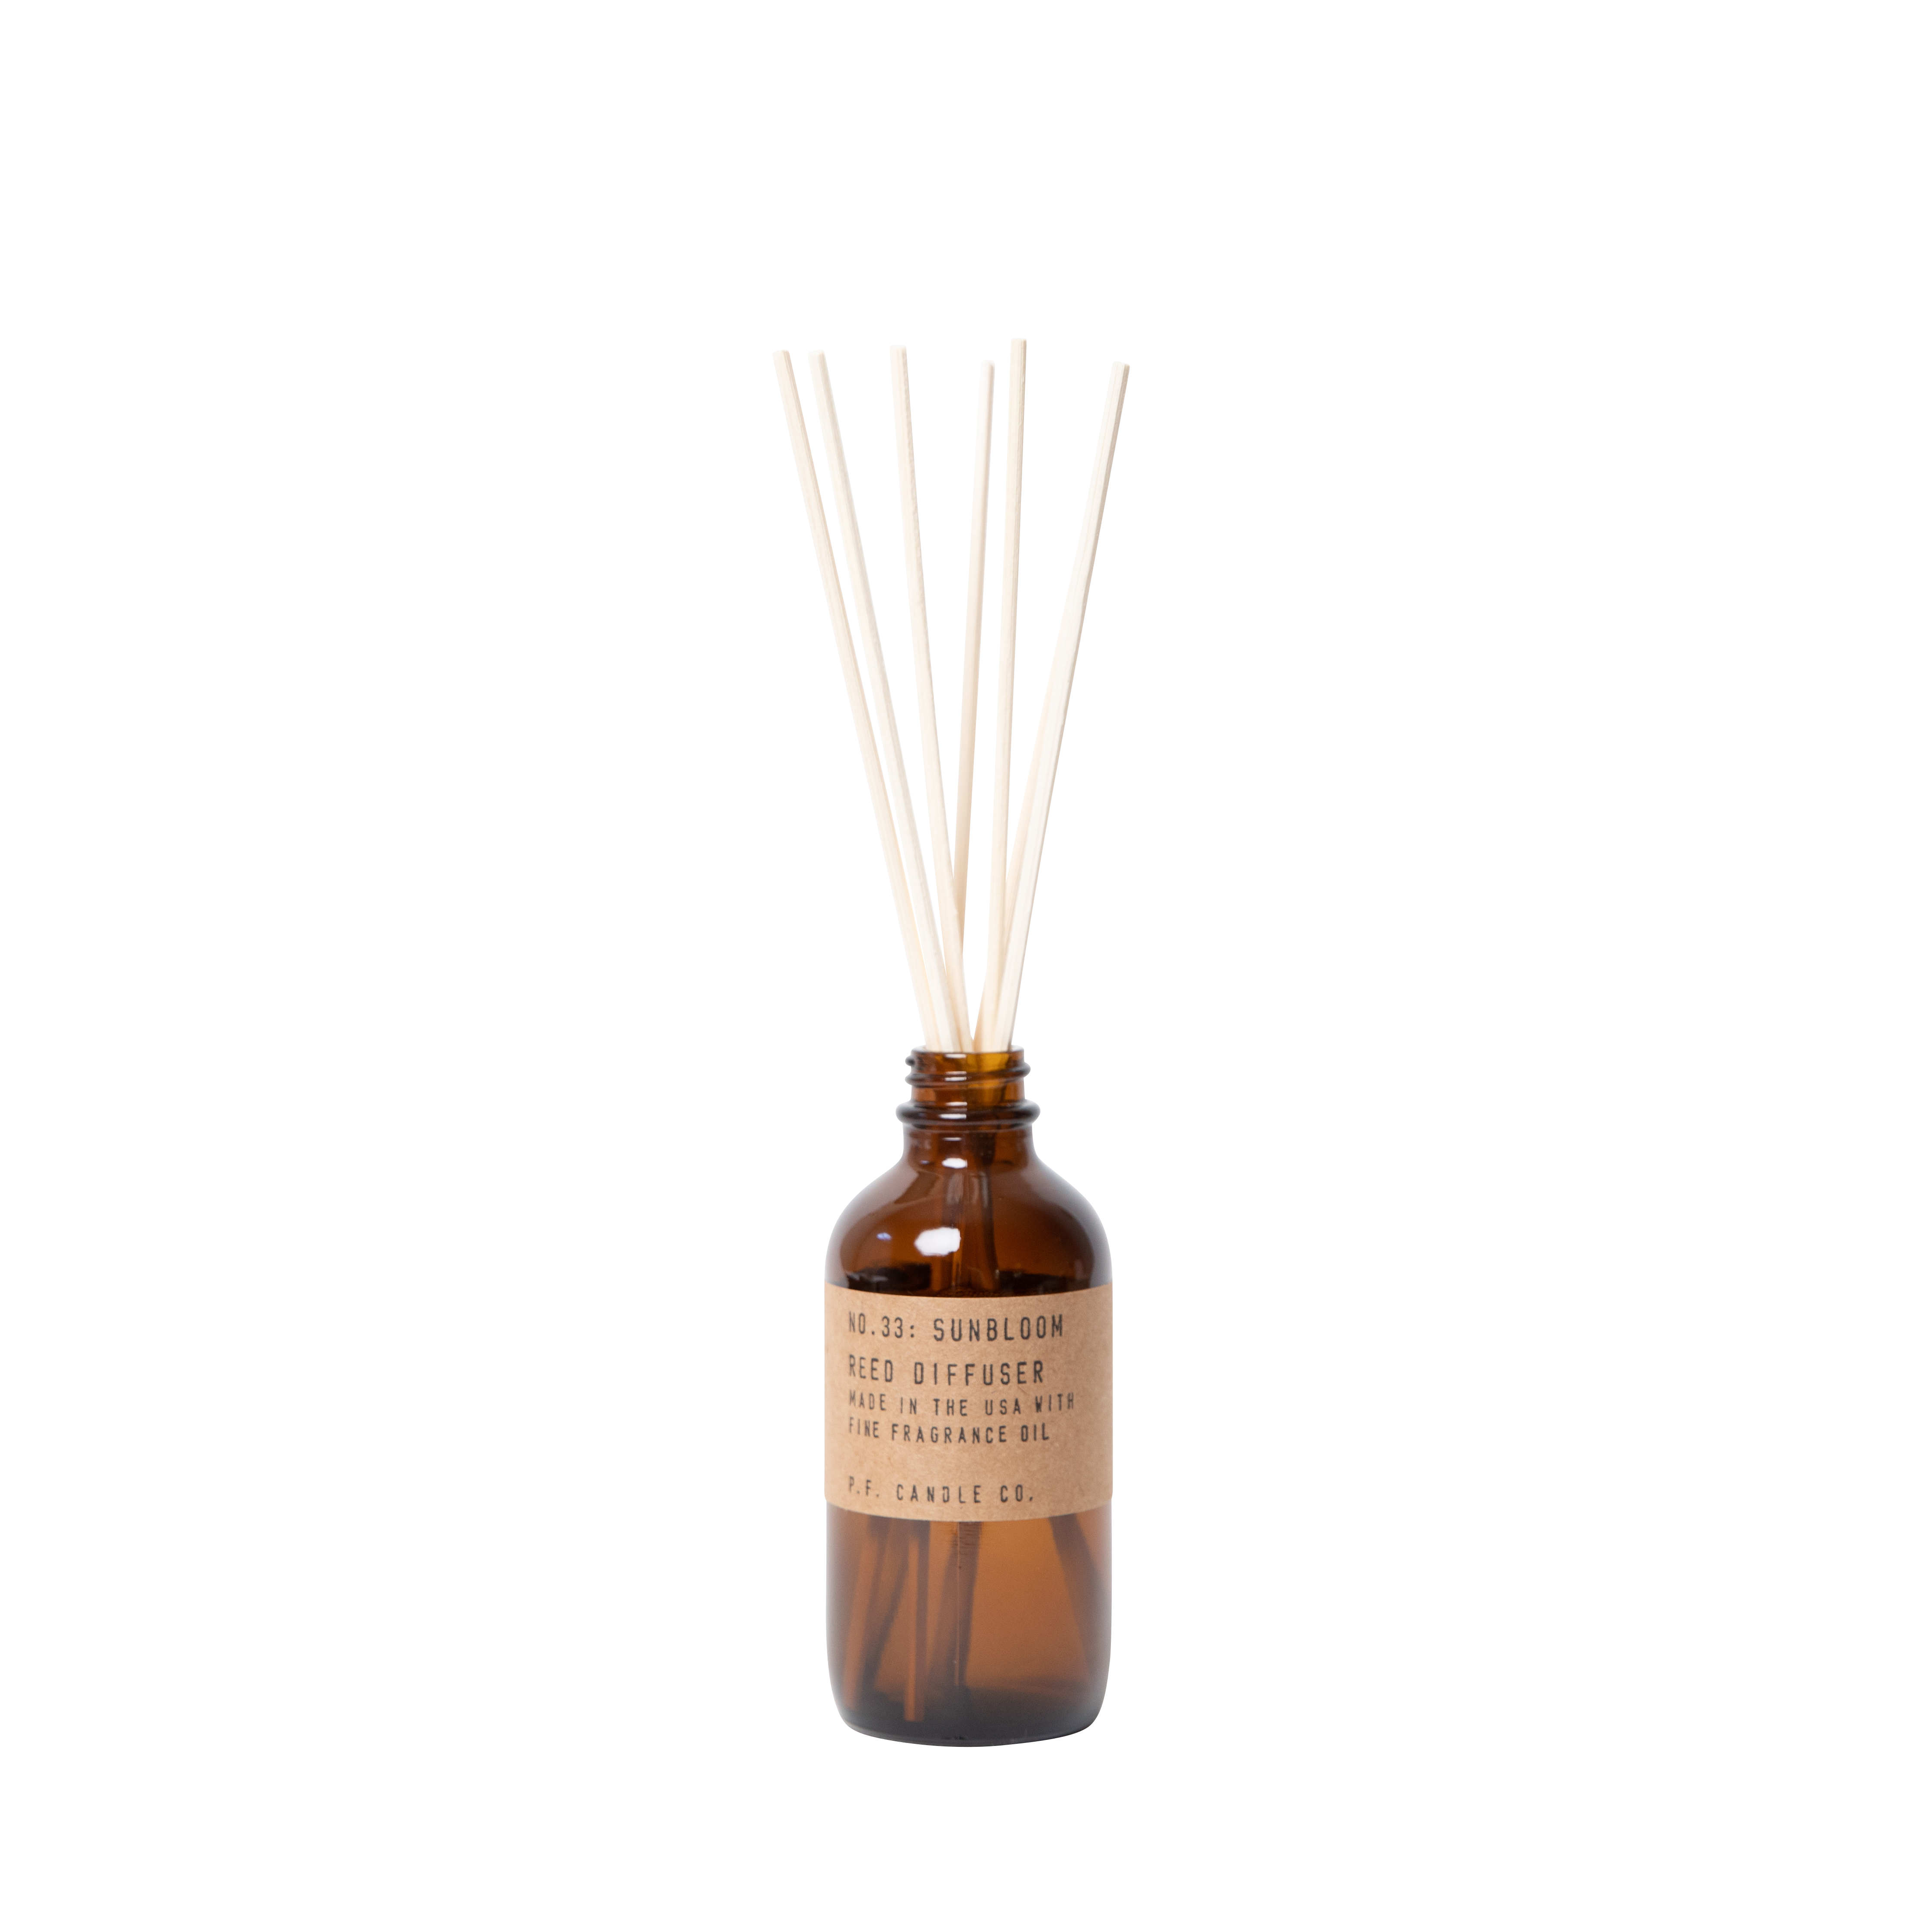 p.f. candle co. glass reed diffuser - Porch Light